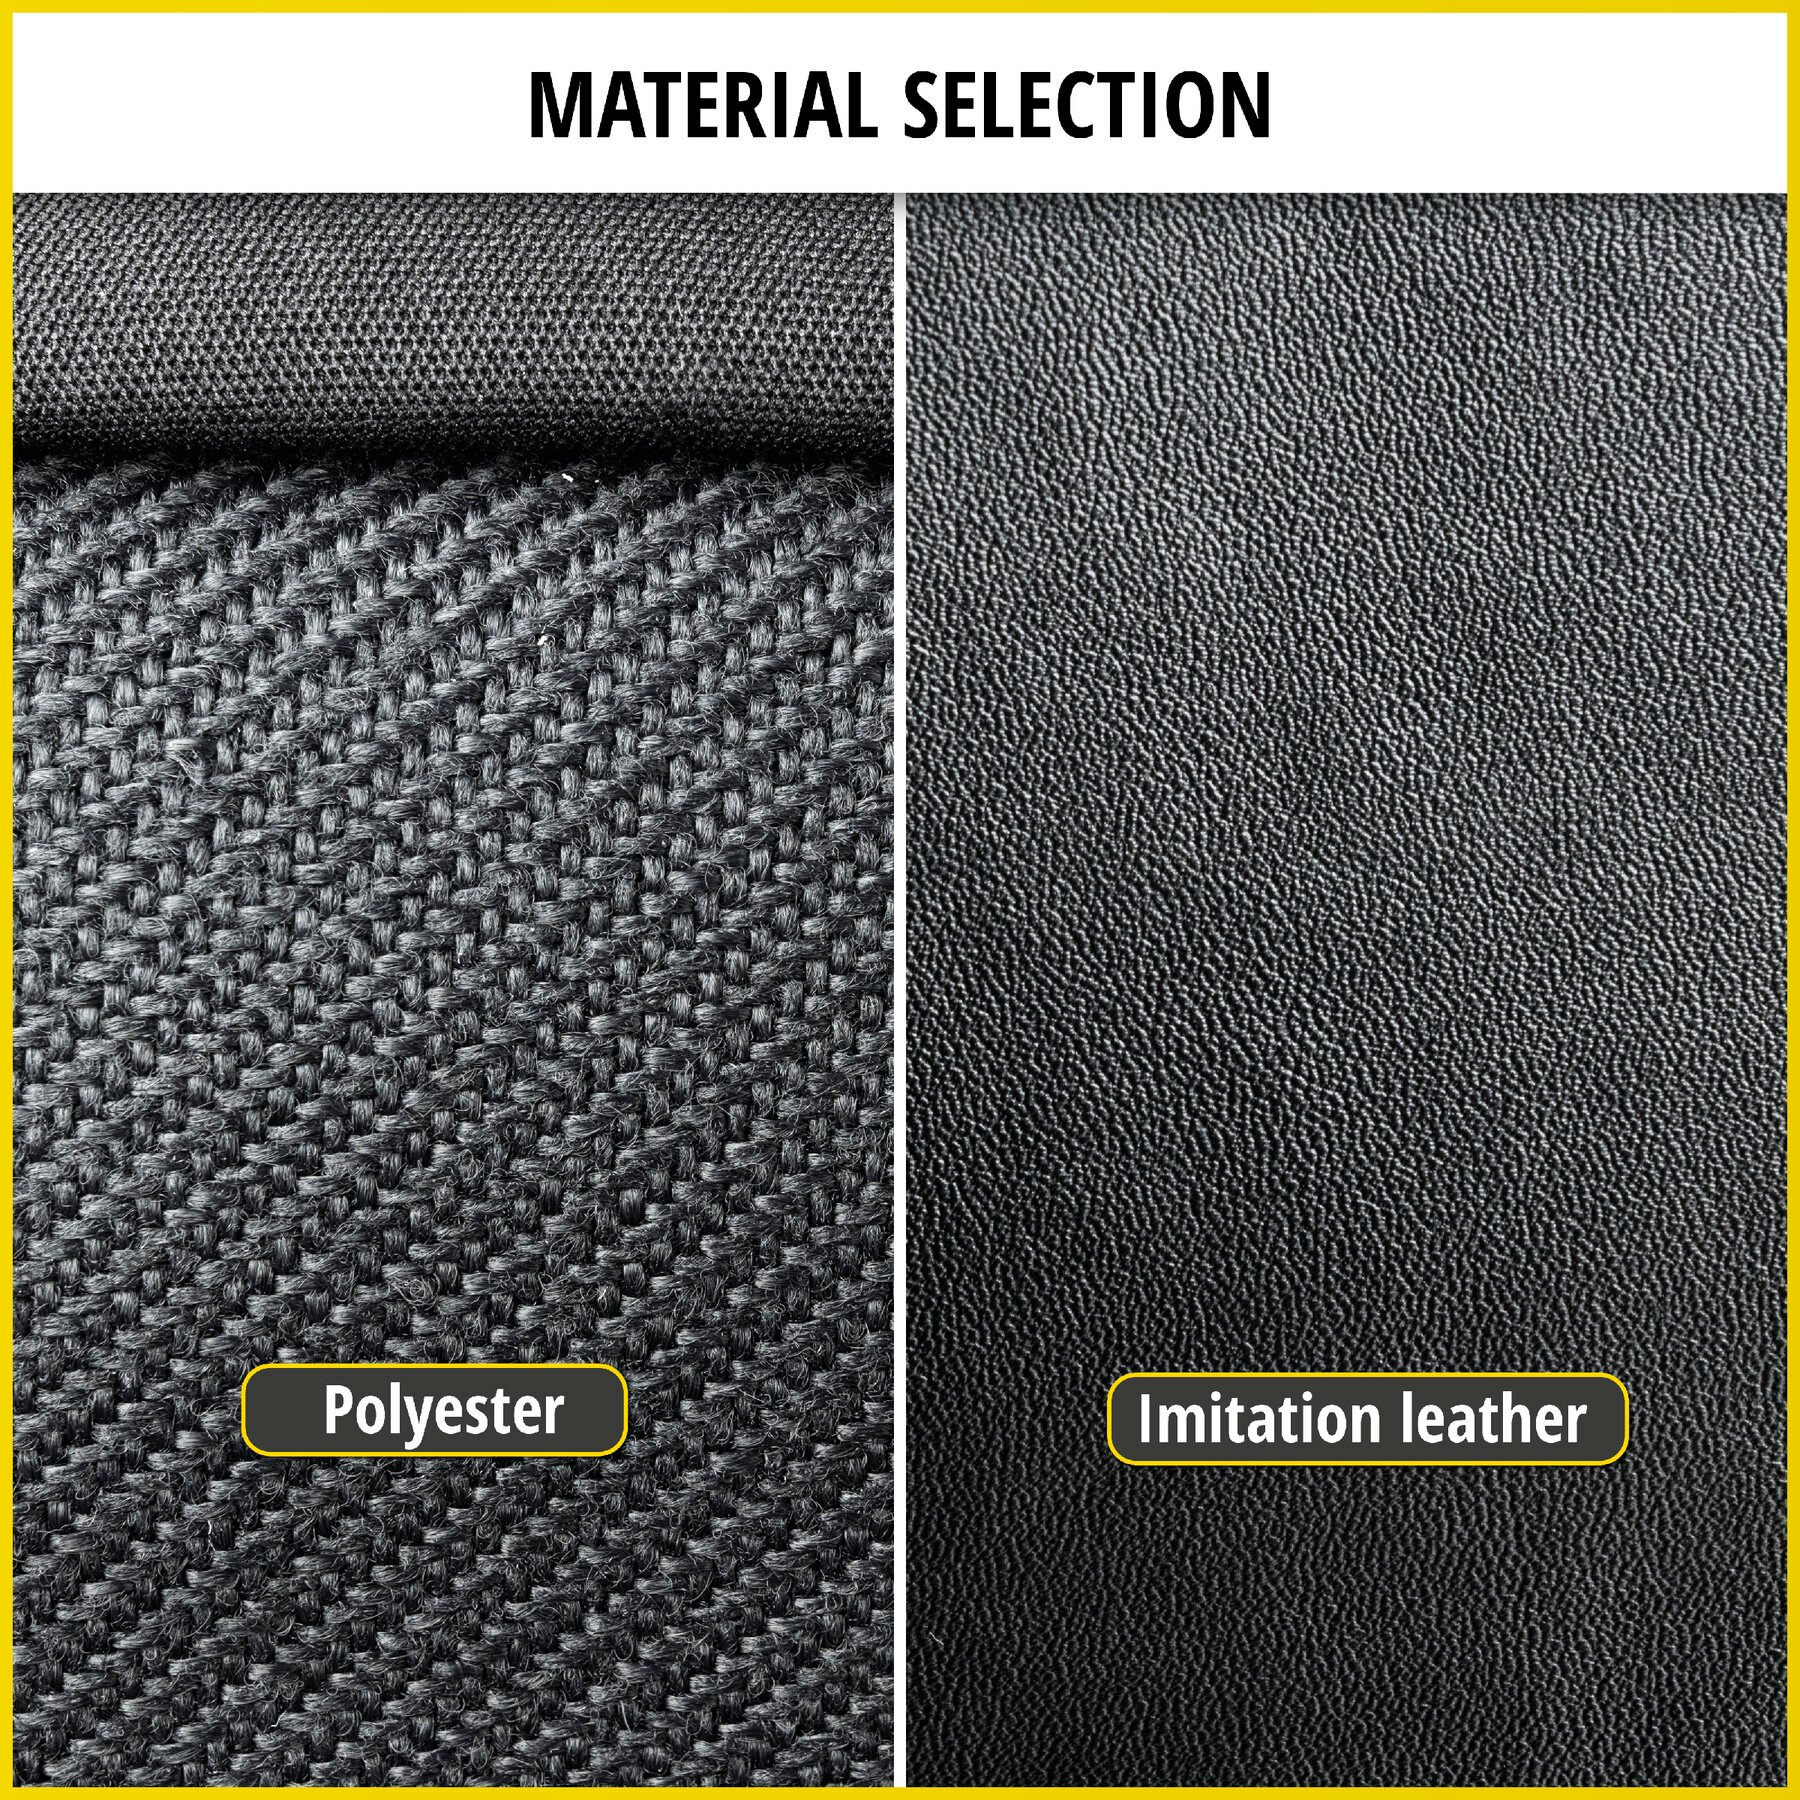 Seat cover made of imitation leather for Ford Transit, single seat cover, double bench seat cover